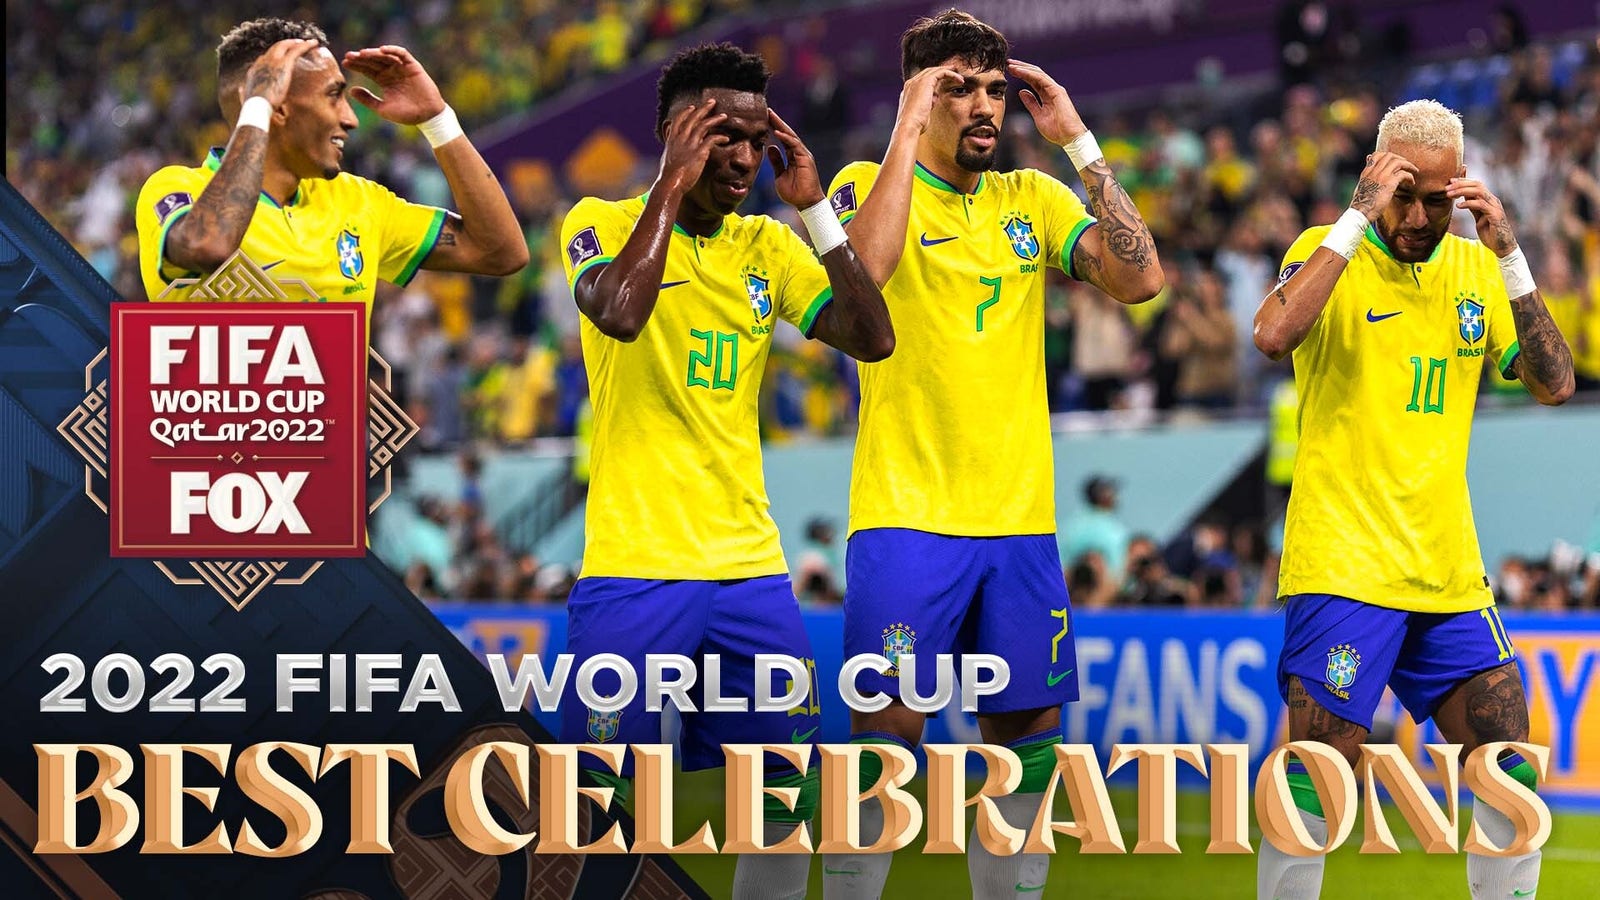 2022 FIFA World Cup: the best celebration of the tournament